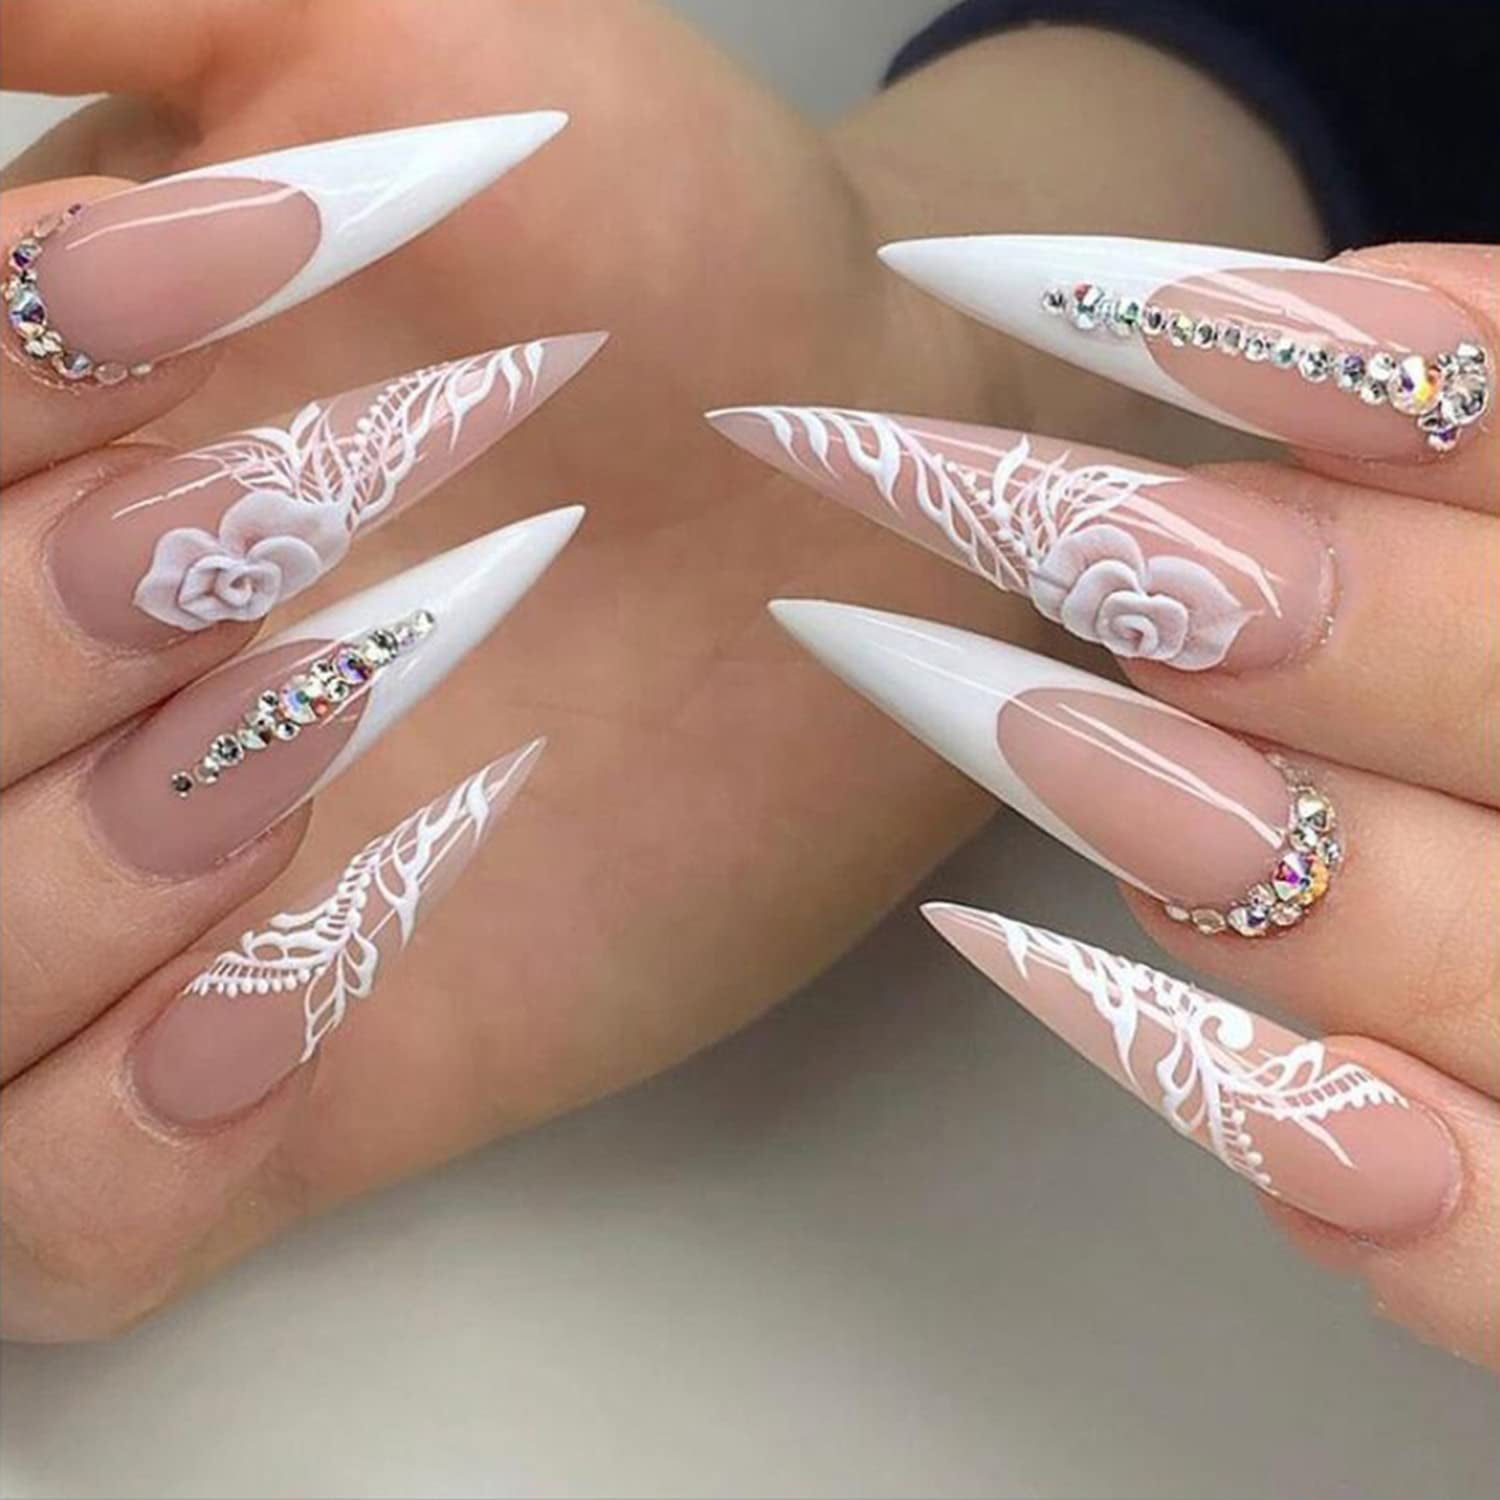 Flower Press on Nails Super Long Fake Nails Acrylic Ballet French Pointed  French White Rose Flowers Rhinestone adhesive tape on Nails Exquisite  Design Nails for Women and Girls 24 Pcs 